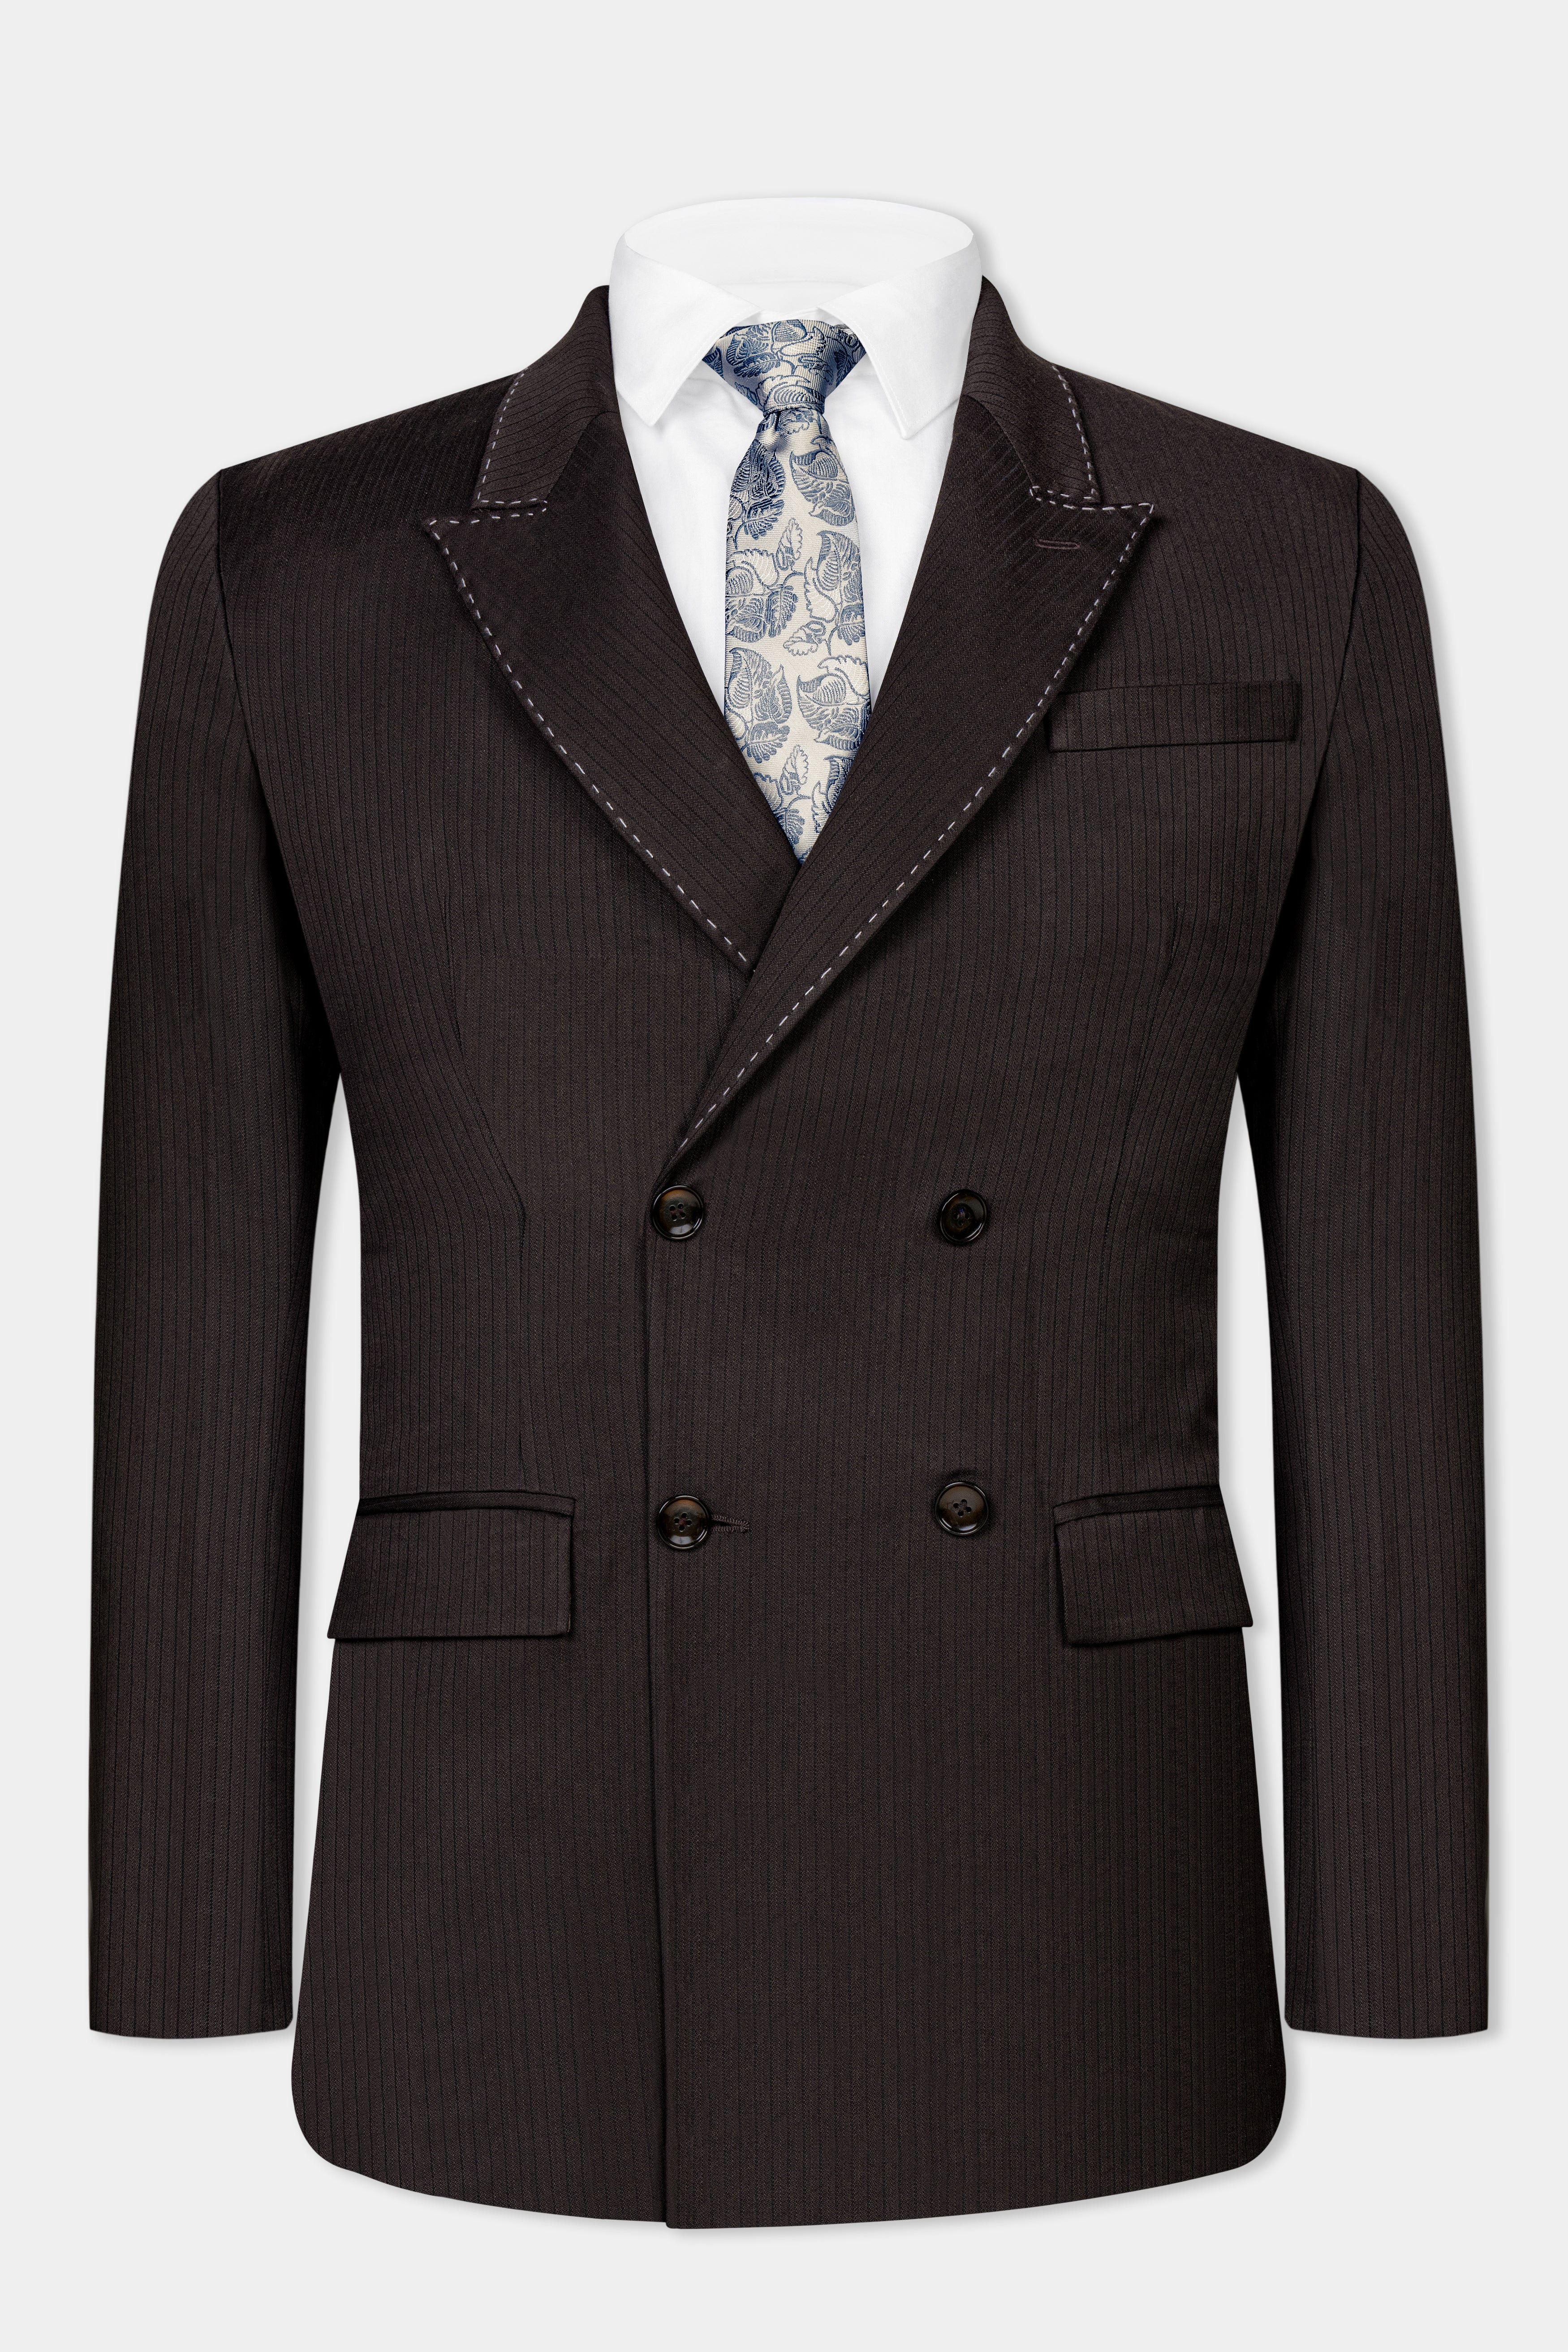 Iridium Gray Hand Stitched Lapels Wool Rich Double Breasted Designer Suit ST3131-DB-CT-36, ST3131-DB-CT-38, ST3131-DB-CT-40, ST3131-DB-CT-42, ST3131-DB-CT-44, ST3131-DB-CT-46, ST3131-DB-CT-48, ST3131-DB-CT-50, ST3131-DB-CT-52, ST3131-DB-CT-54, ST3131-DB-CT-56, ST3131-DB-CT-58, ST3131-DB-CT-60